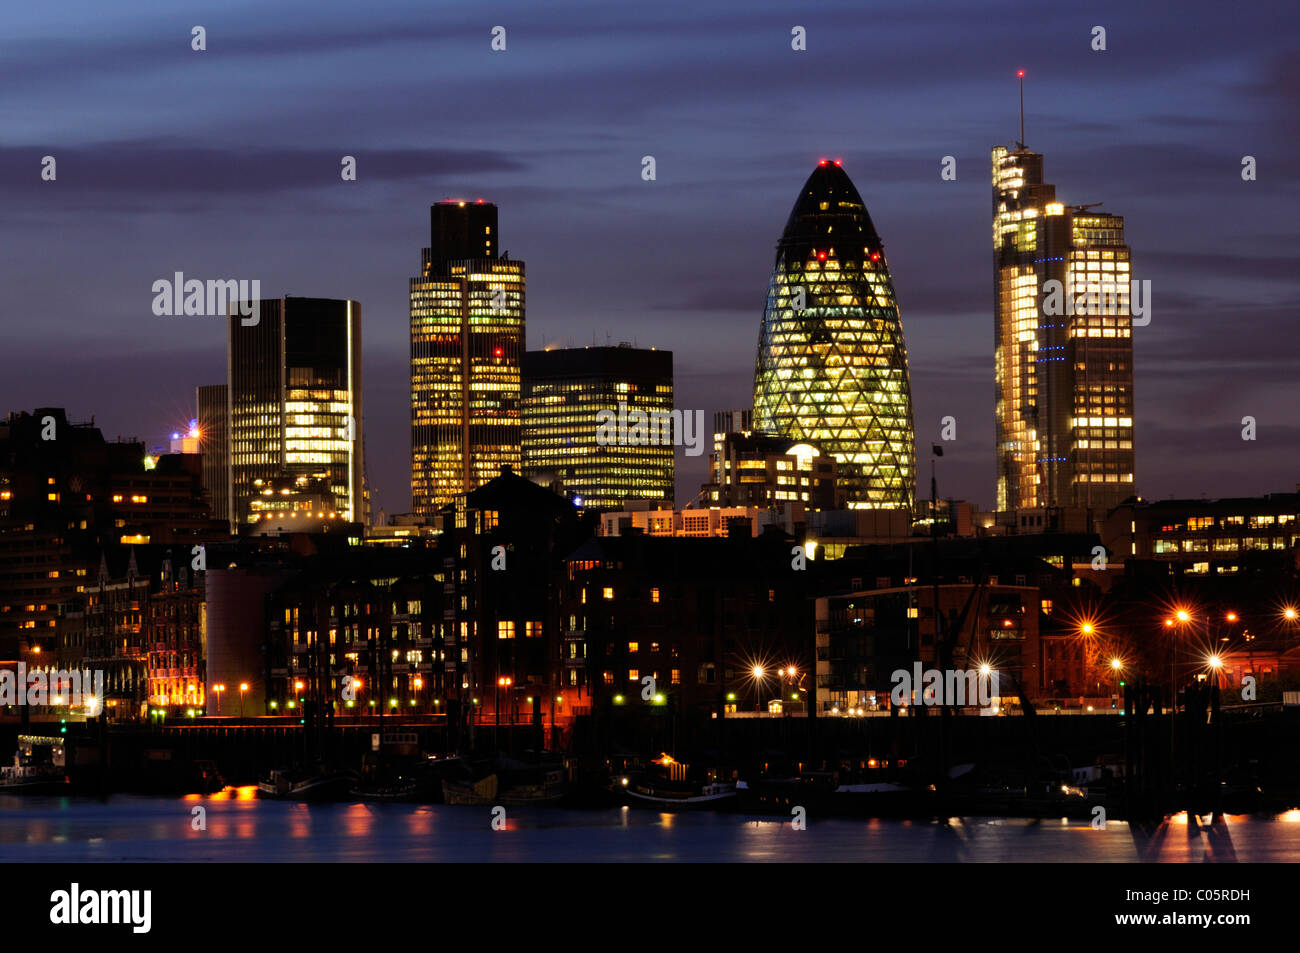 City of London Skyline at Night including Tower 42, 30 St Mary Axe and Heron Tower seen from Bermondsey, London, England, UK Stock Photo